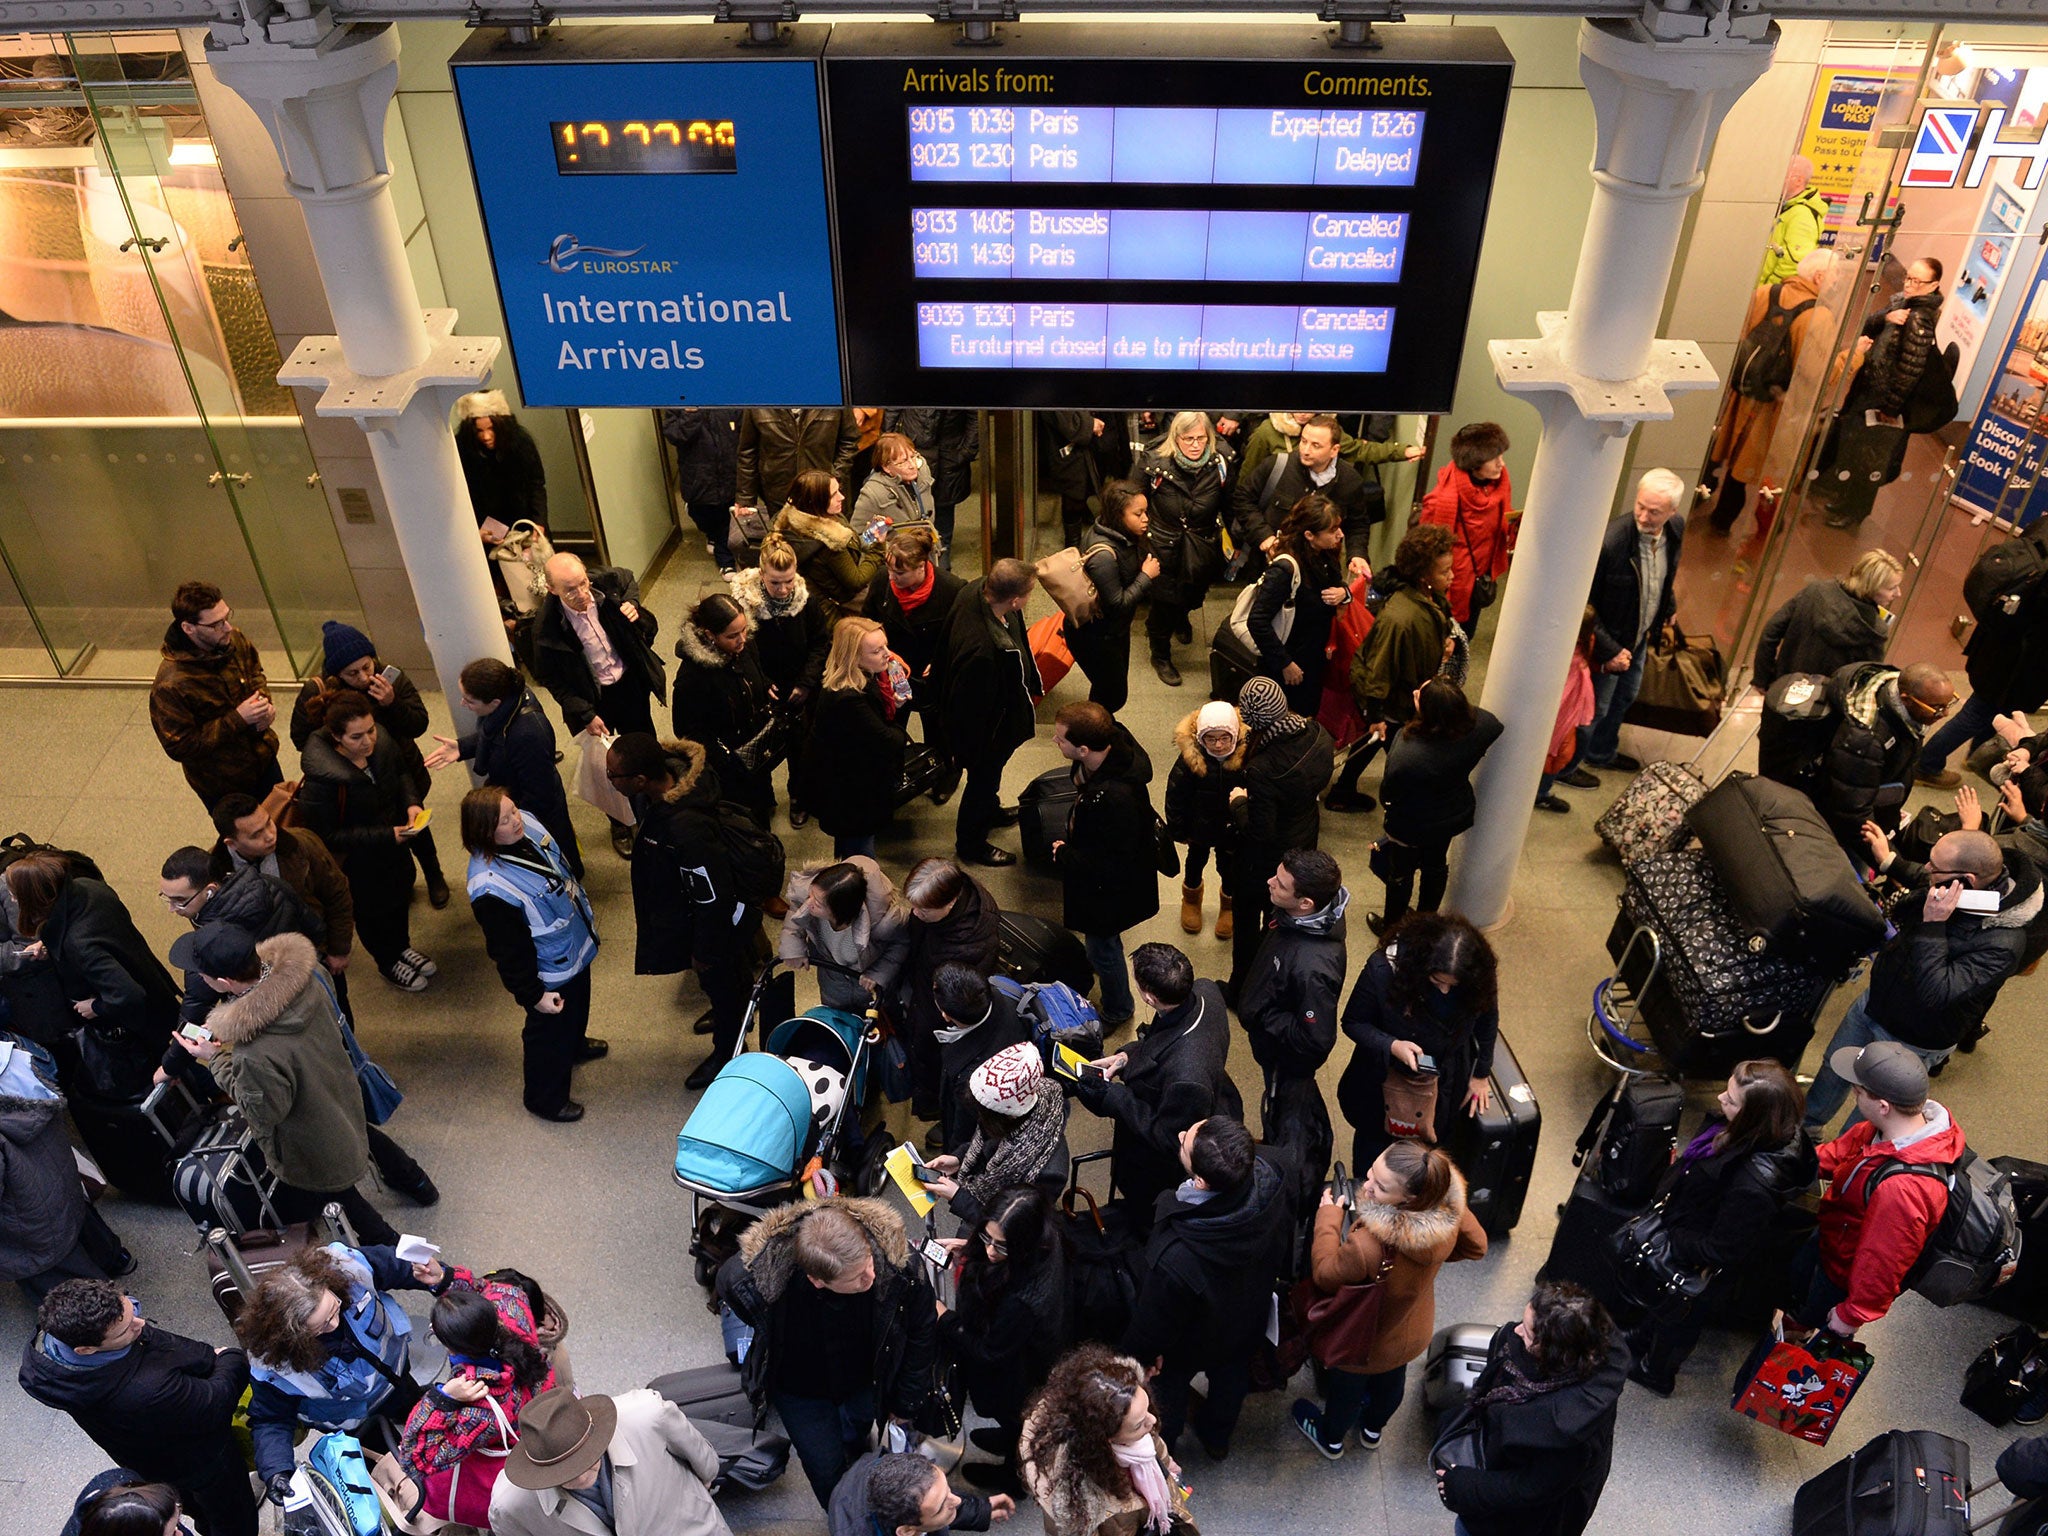 Hundreds of passengers were left stranded when Eurostar cancelled all of its services between Britain and the Continent